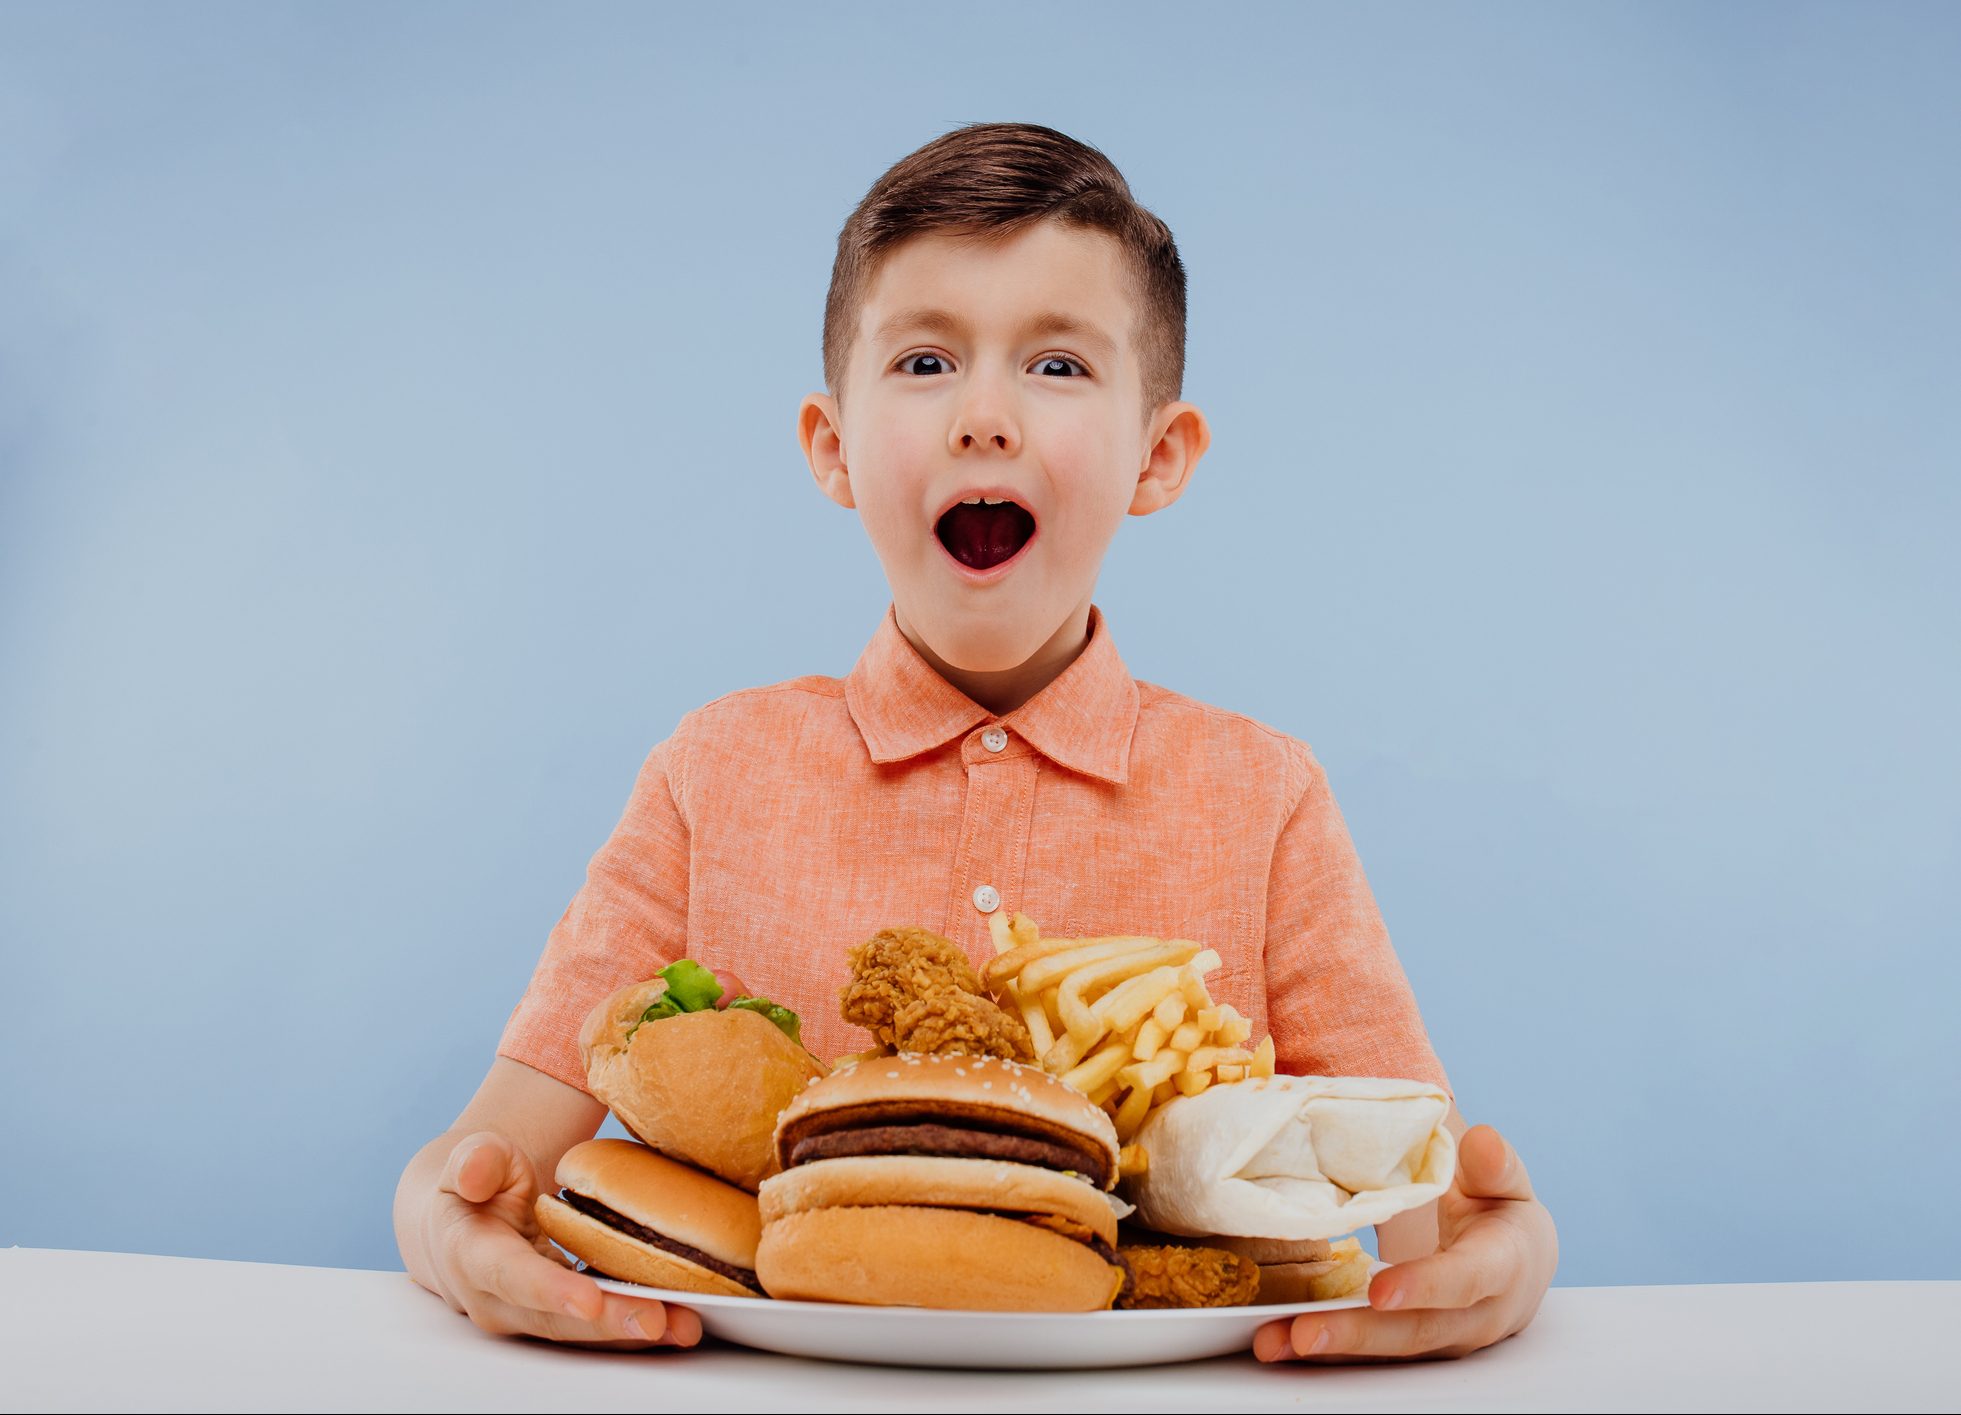 FUNIBER-excited-little-boy-with-open-mouth-has-junk-food-on-the-table-looking-forward-isolated-on-blue-background-studio-